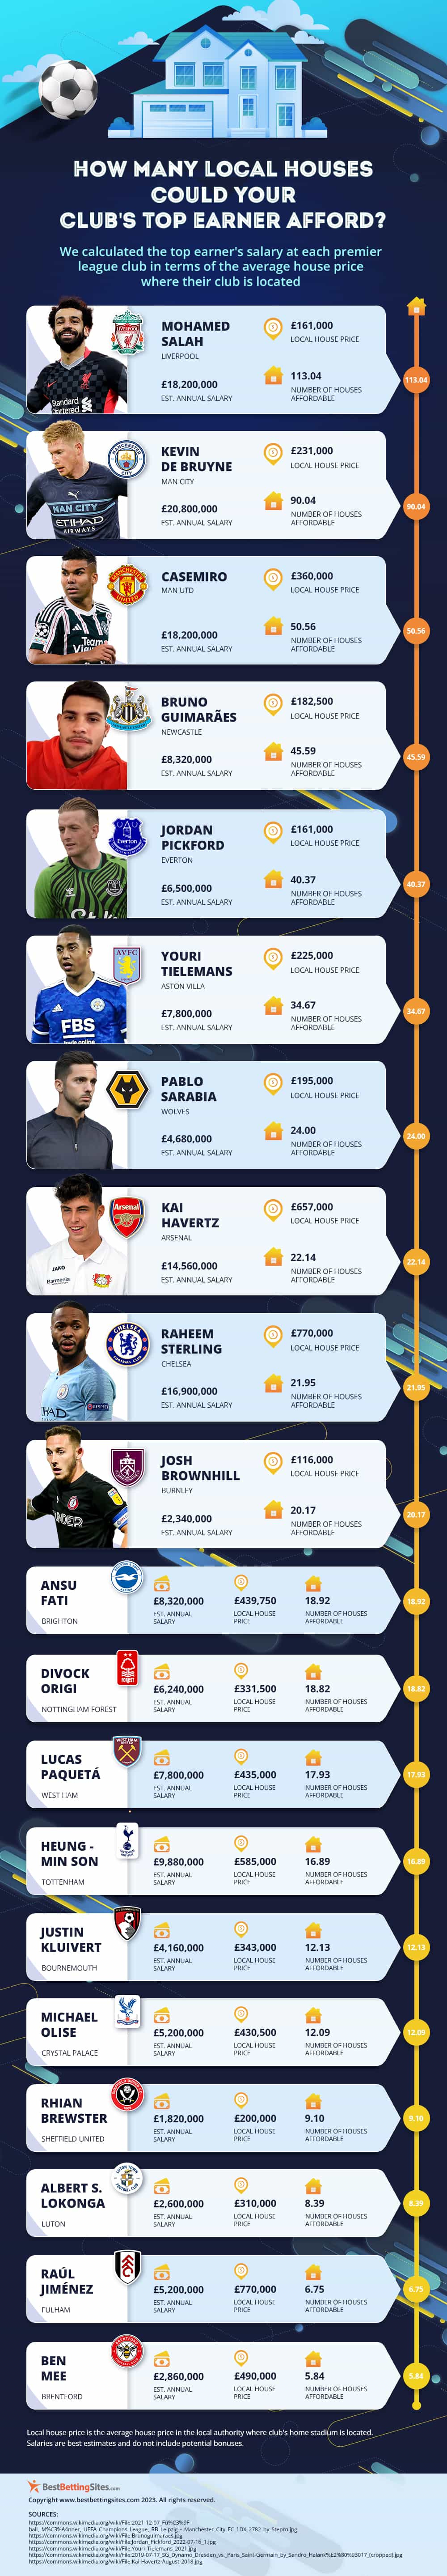 A detailed infographic showing the wages of the highest-paid Premier League players for each club